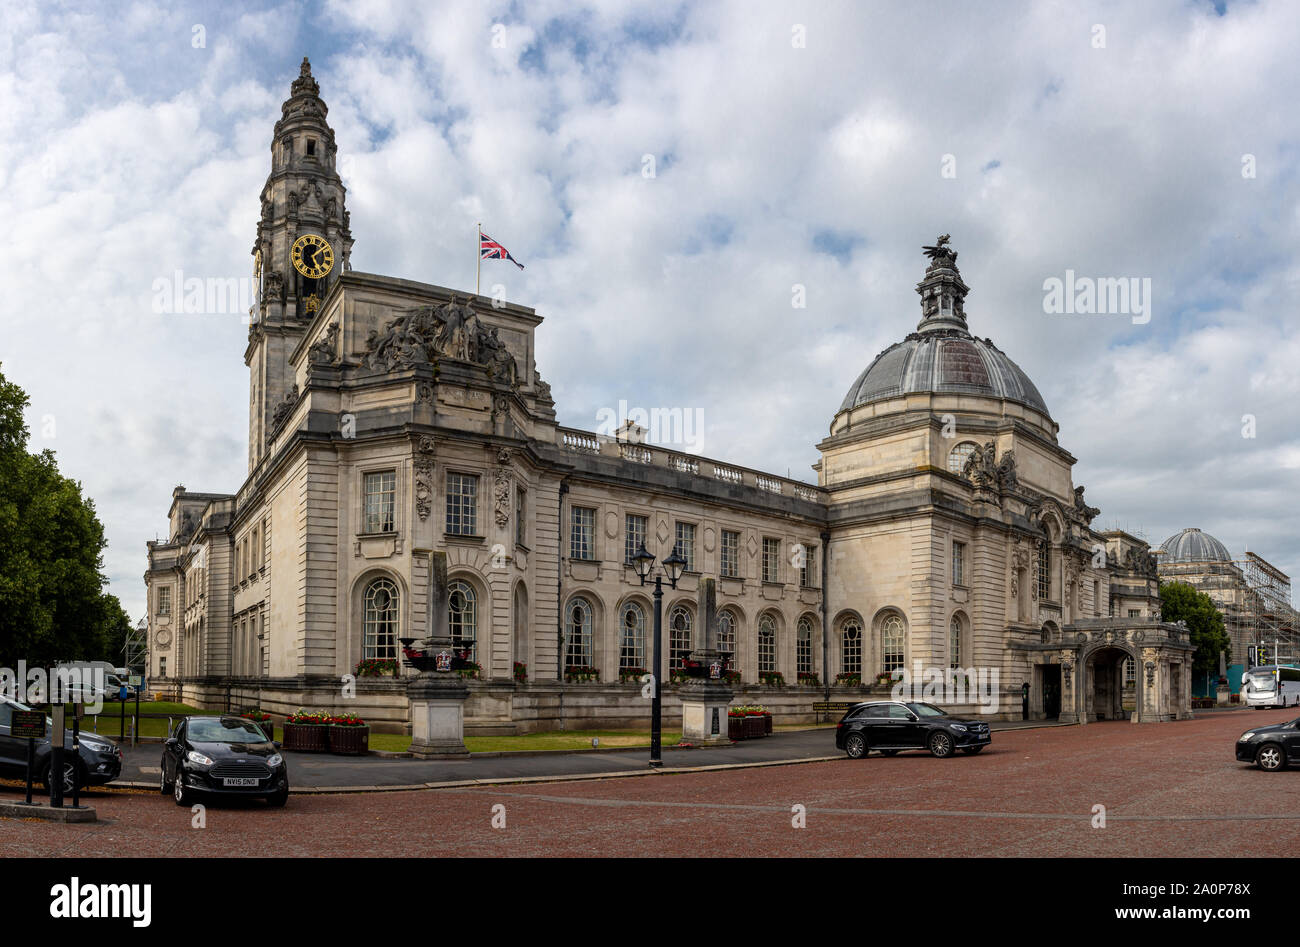 Cardiff, Wales, UK - July 21, 2019: Sun shines on the Edwardian Baroque exterior of Cardiff's City Hall. Stock Photo